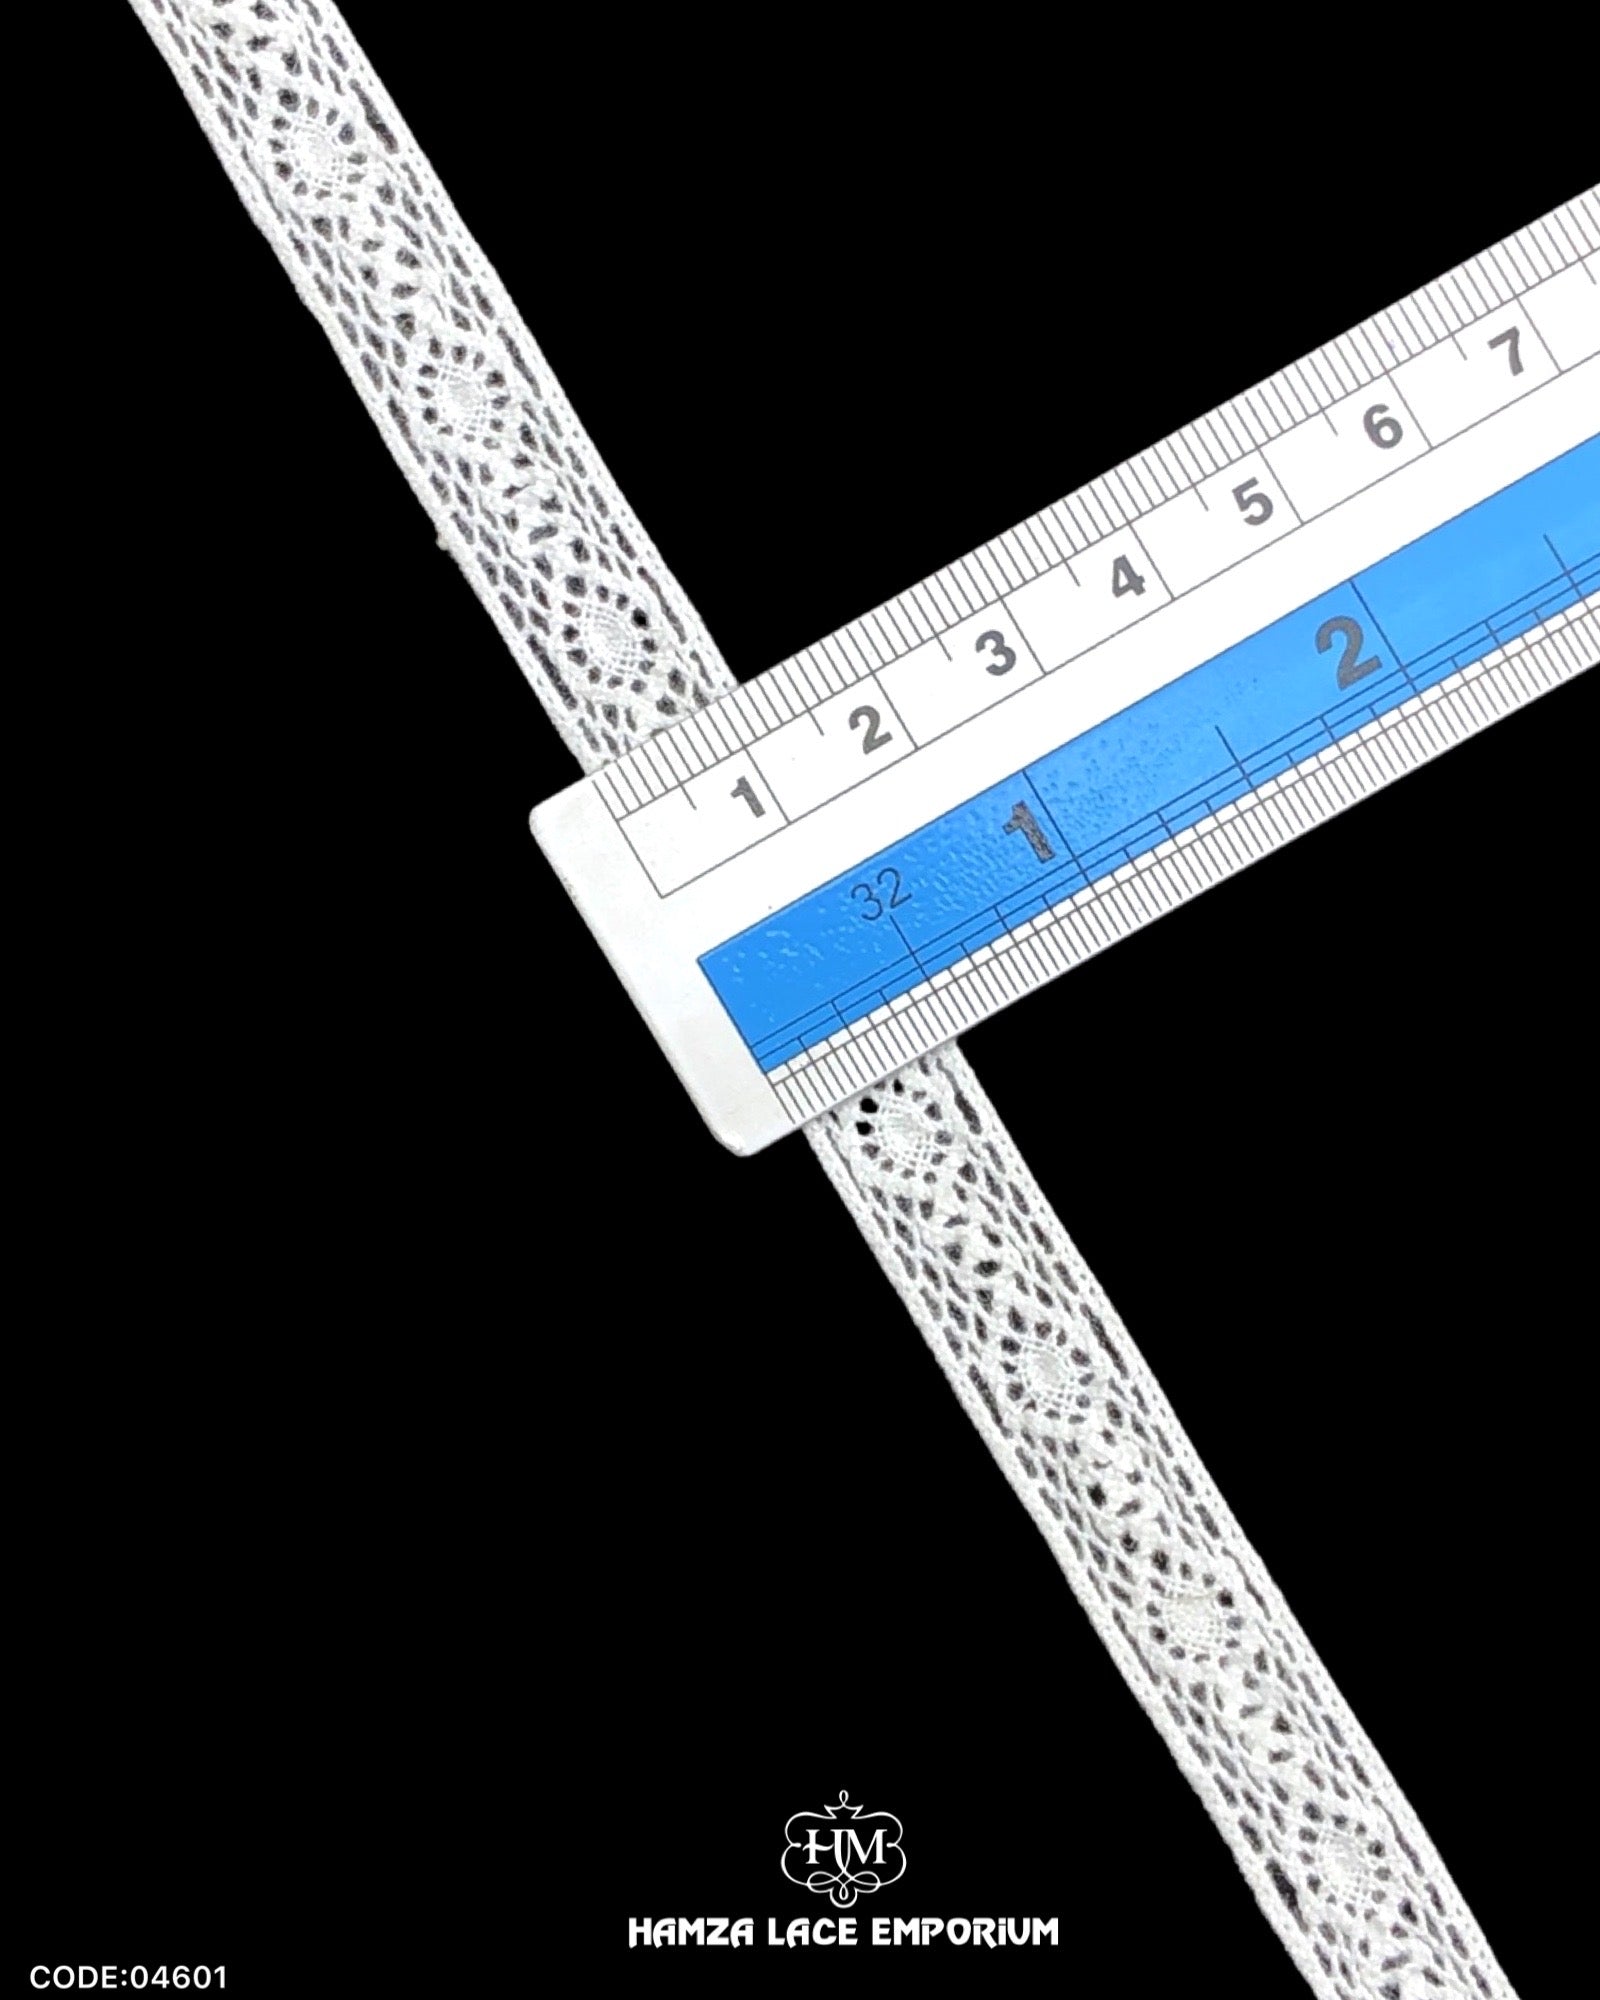 Size of the 'Center Filling Crochet Lace 04601' is shown with the help of a ruler as '0.5' inches